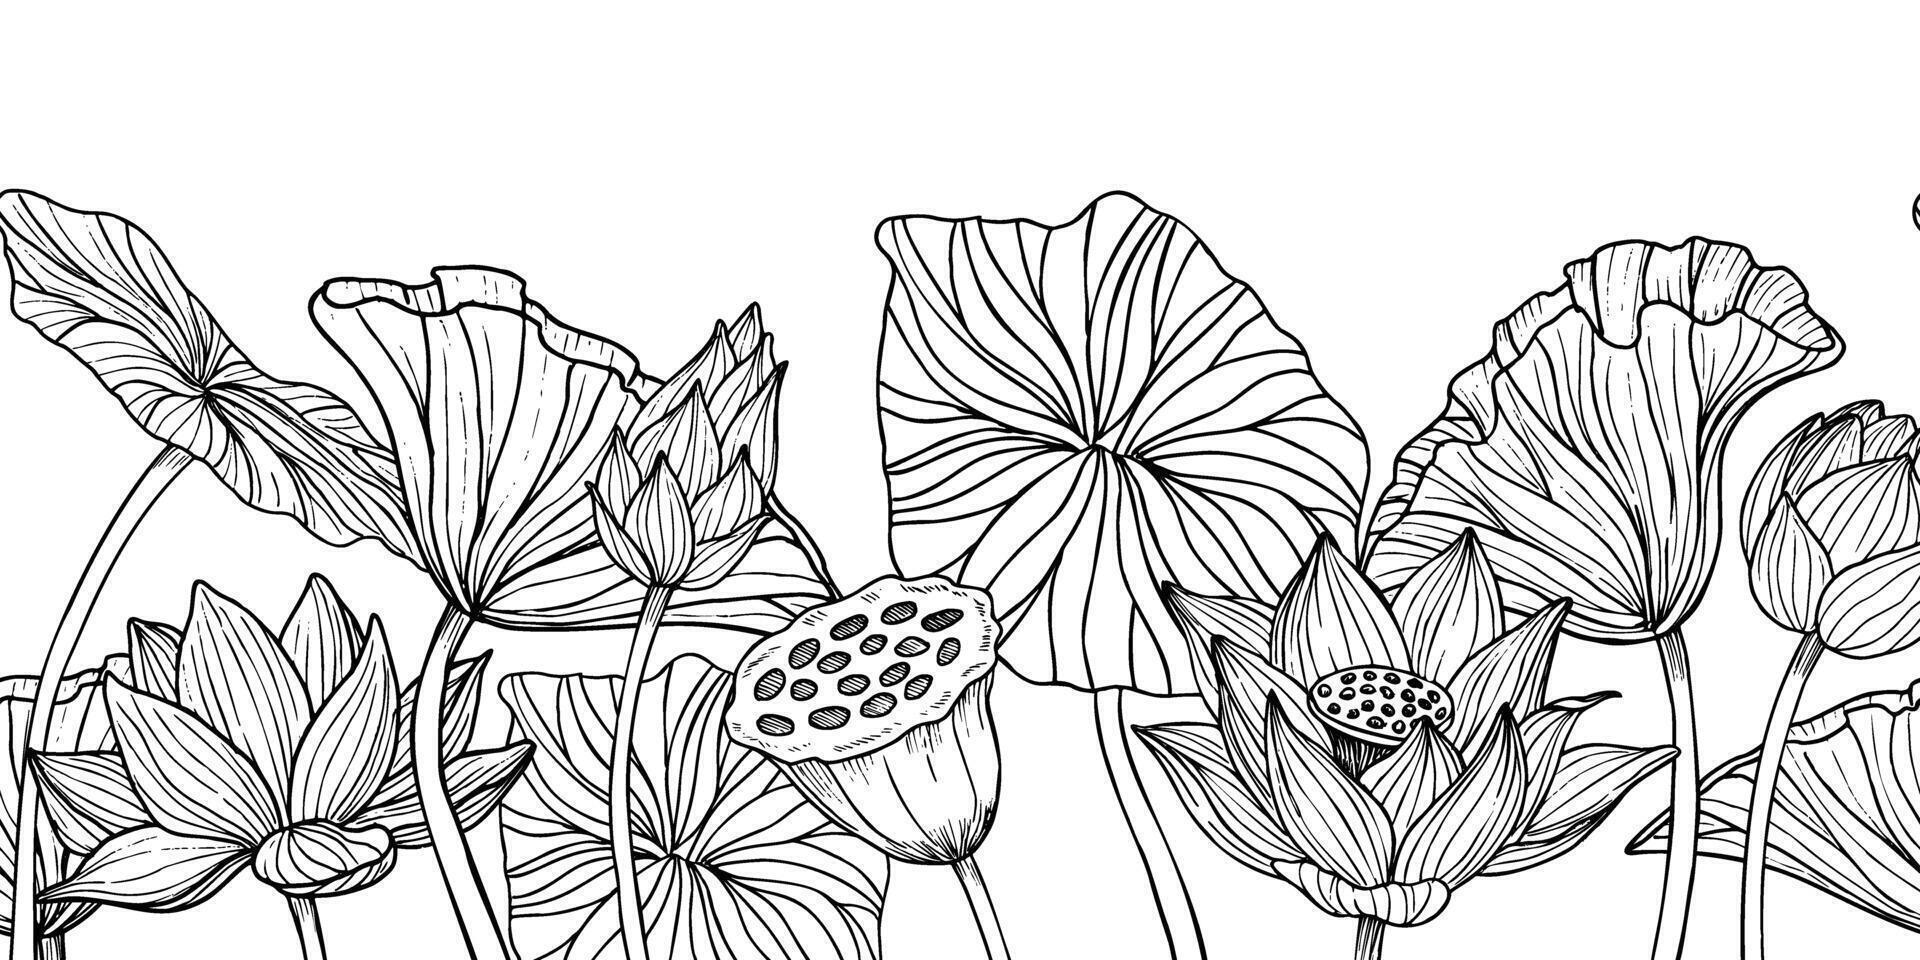 Lotus Flower seamless Border. Hand drawn vector illustration of waterlily plants on isolated background. Floral pattern for frame or spa Zen banner. Drawing in black and white colors